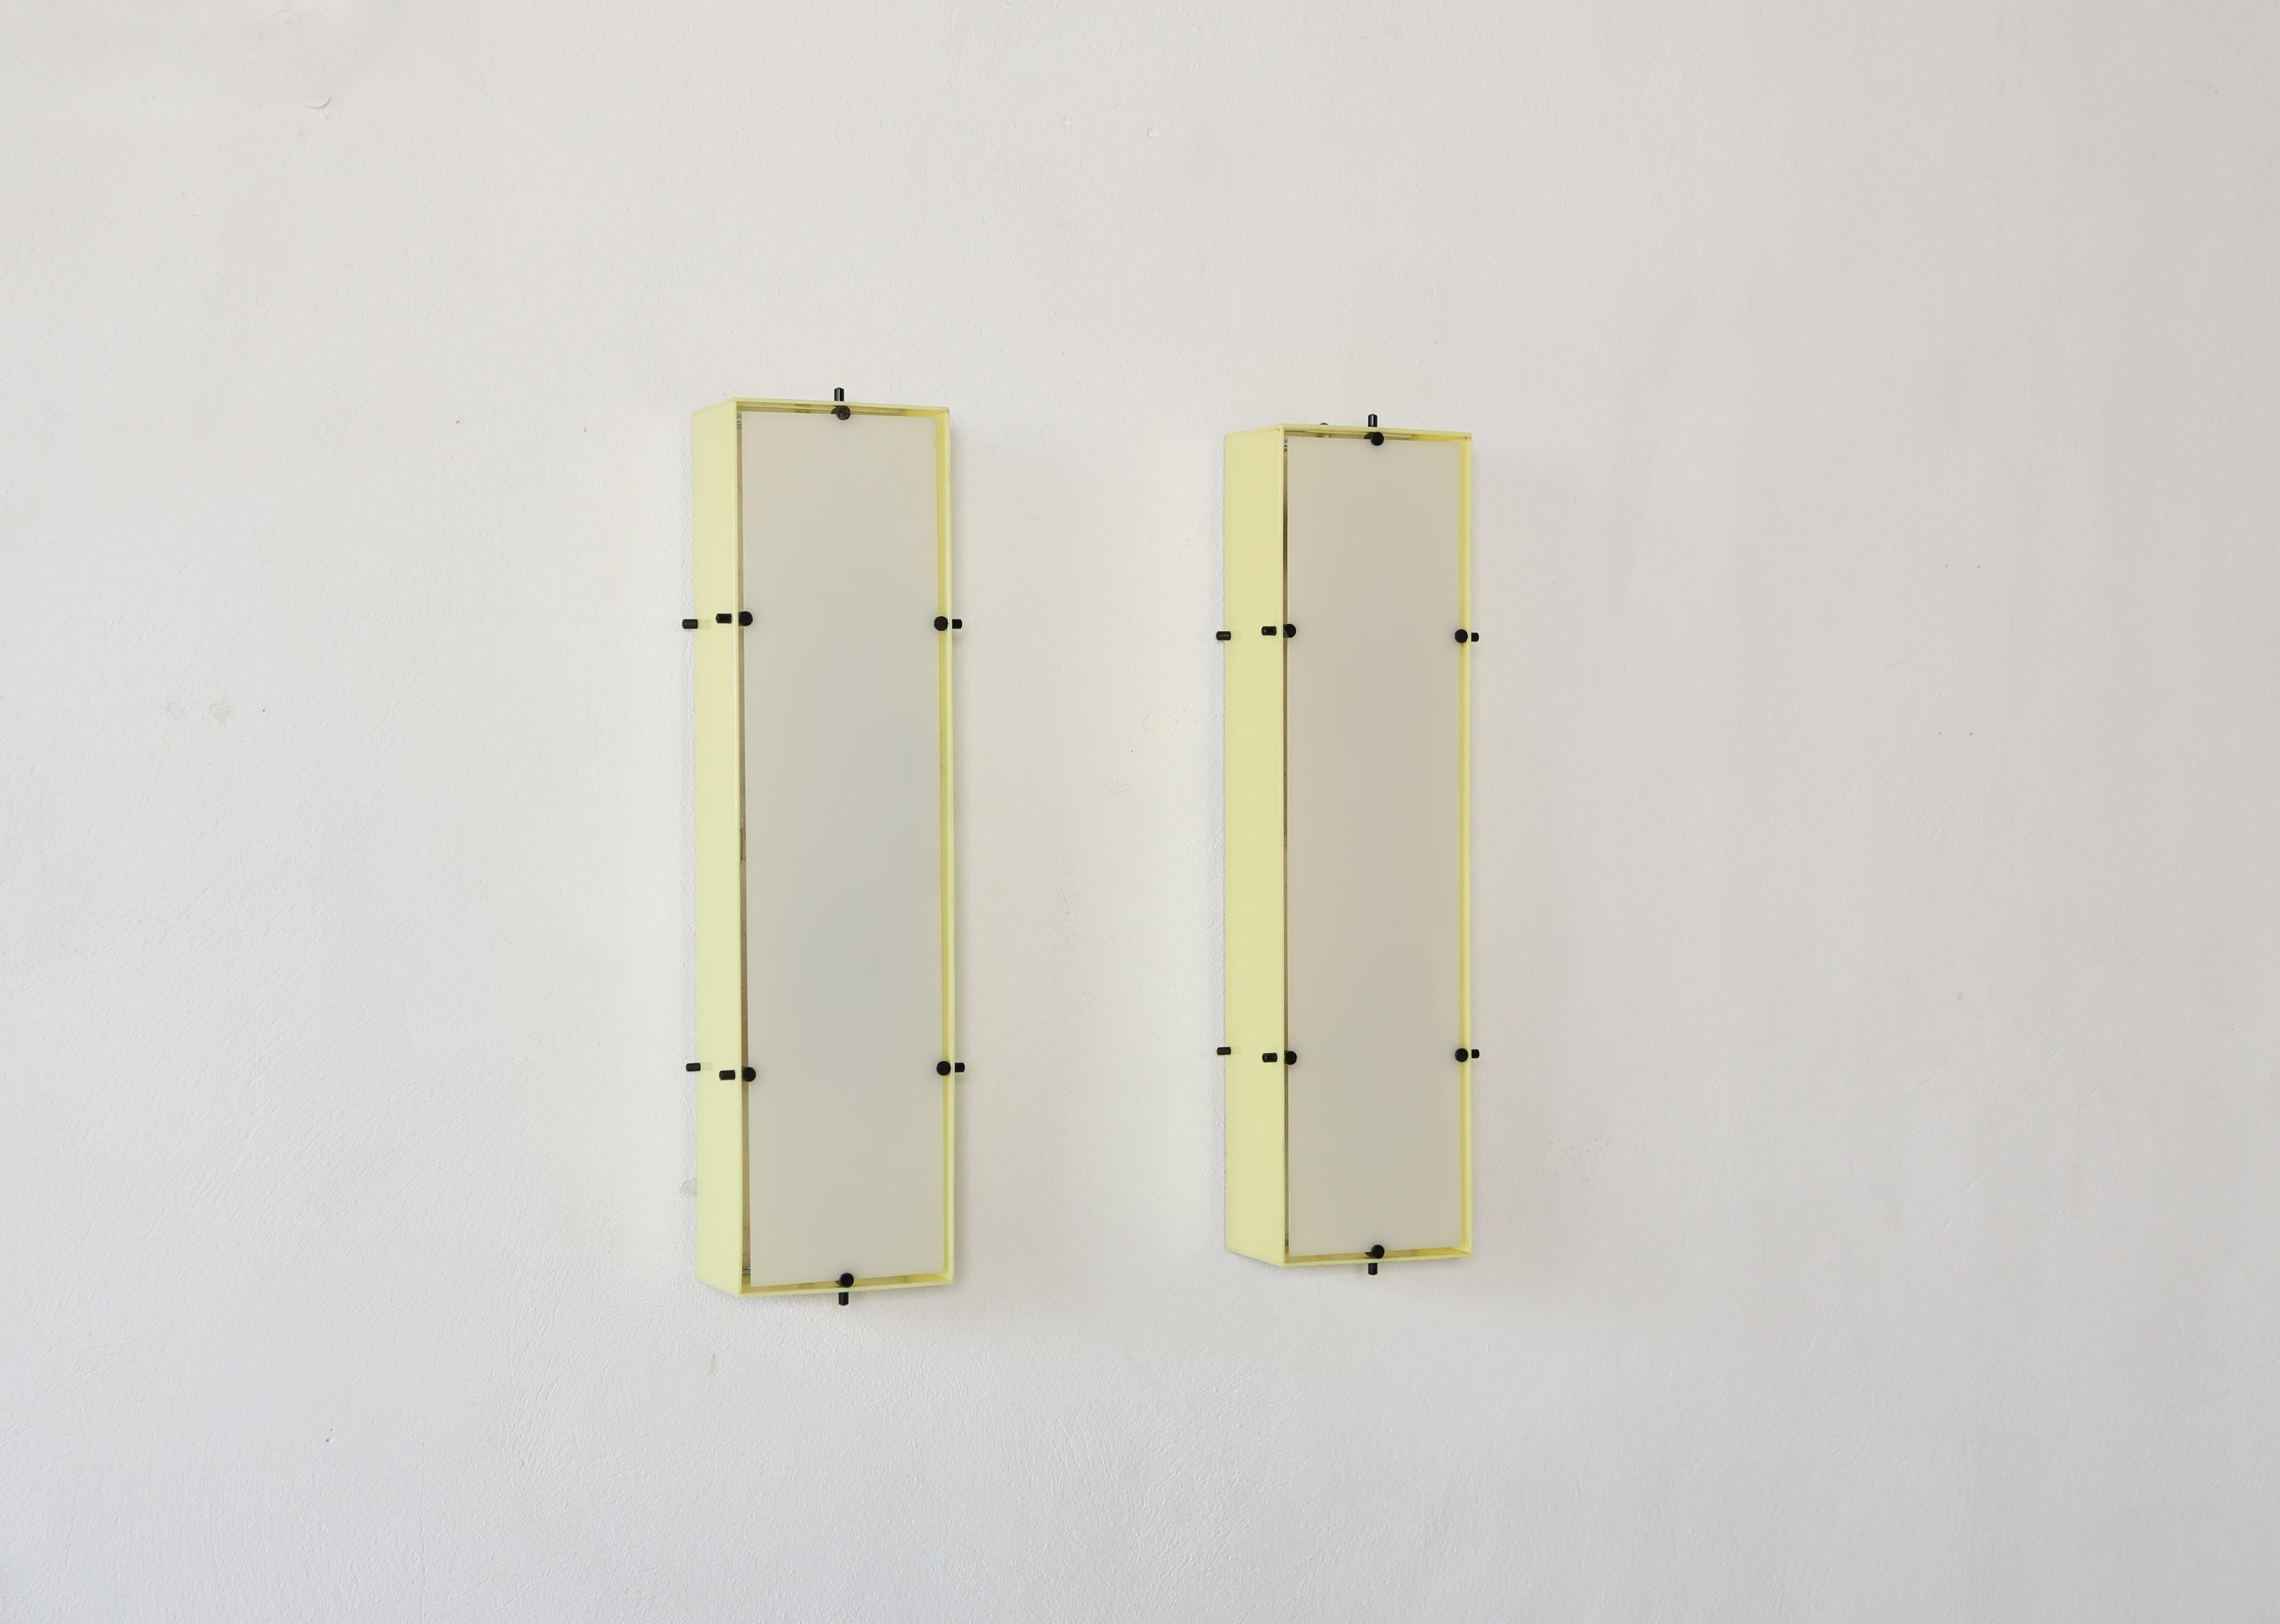 A rare pair of wall sconces / lamps designed by Angelo Lelii for Arredoluce, Italy, 1950s.   Metal backplate with yellow plexiglass sides and white plexiglass front.   Original makers labels present.  Fast shipping worldwide.

